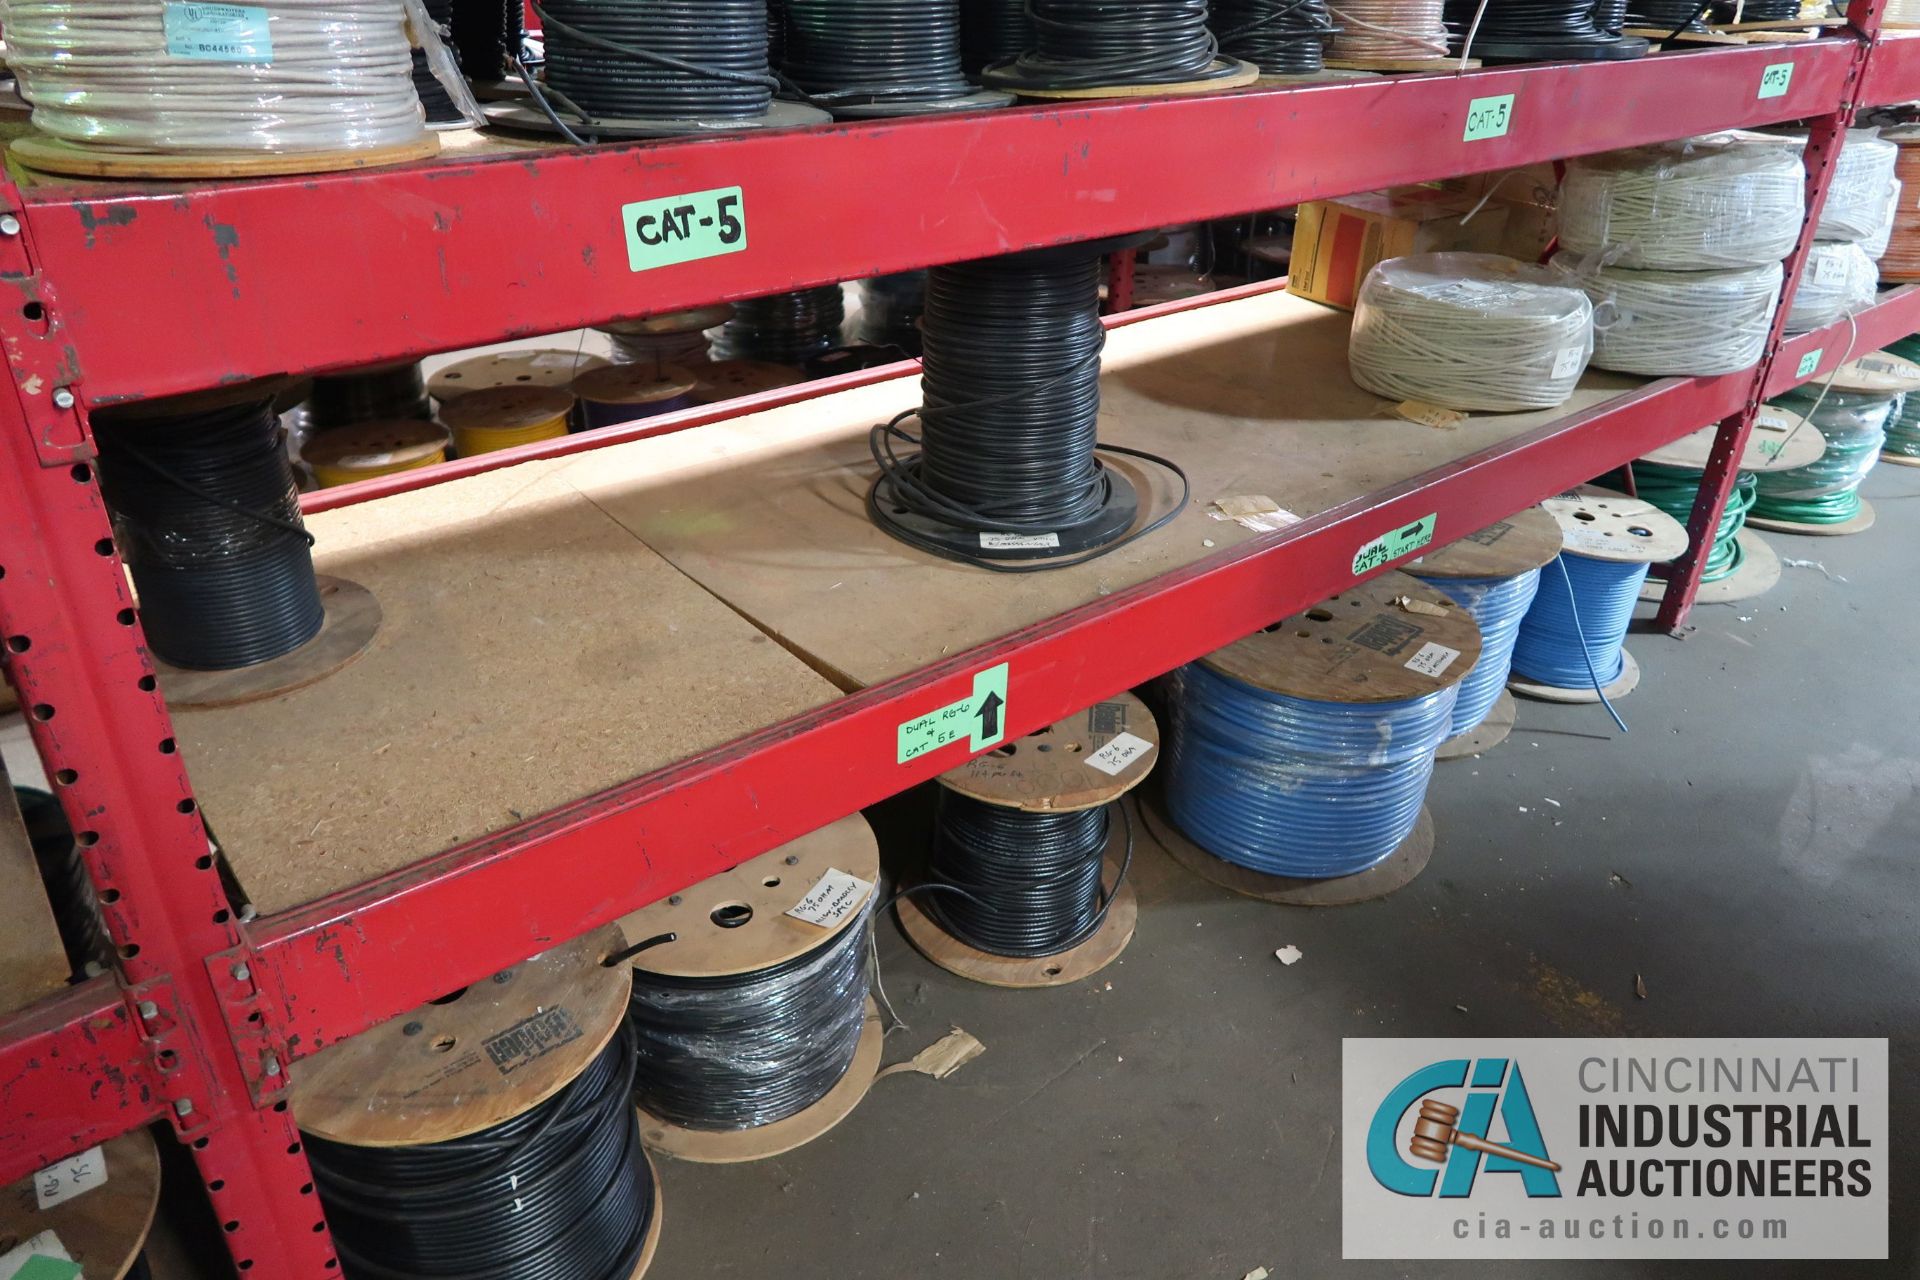 (LOT) LARGE QUANTITY OF COAX CABLE ON (3) SECTIONS RED RACK - APPROX. (130) SPOOLS - SOLD BY THE - Image 7 of 14